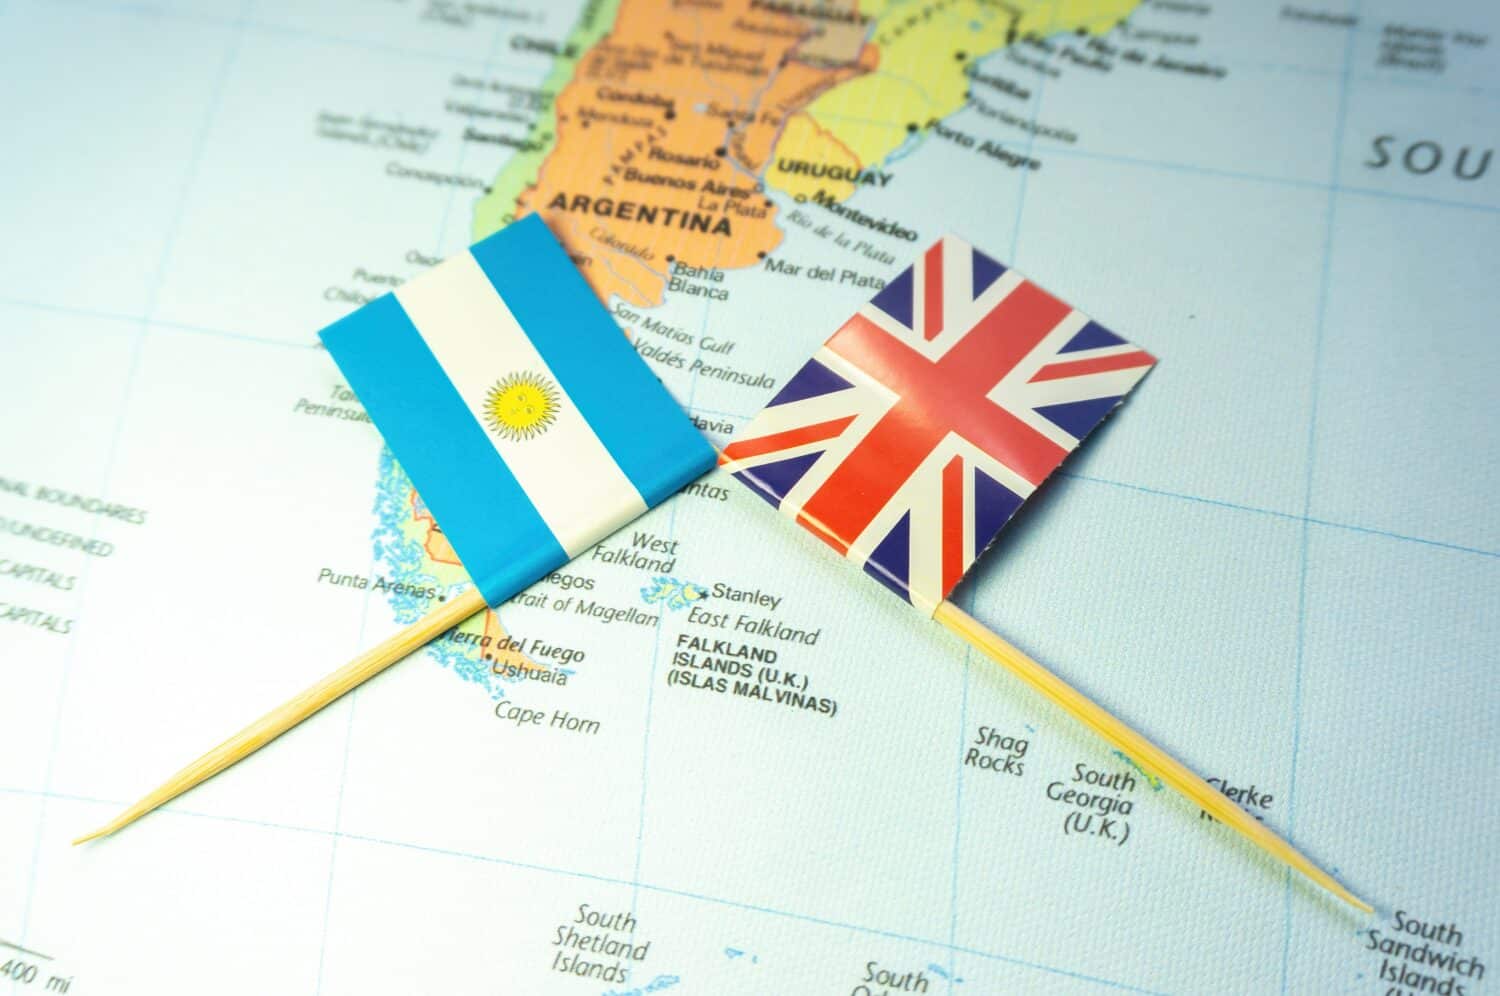 Argentine and British flags placed around the Falkland Islands or the Malvinas Islands. Local conflicts. Territorial disputes. Island war. Sovereignty crisis. Battle of the Falklands.